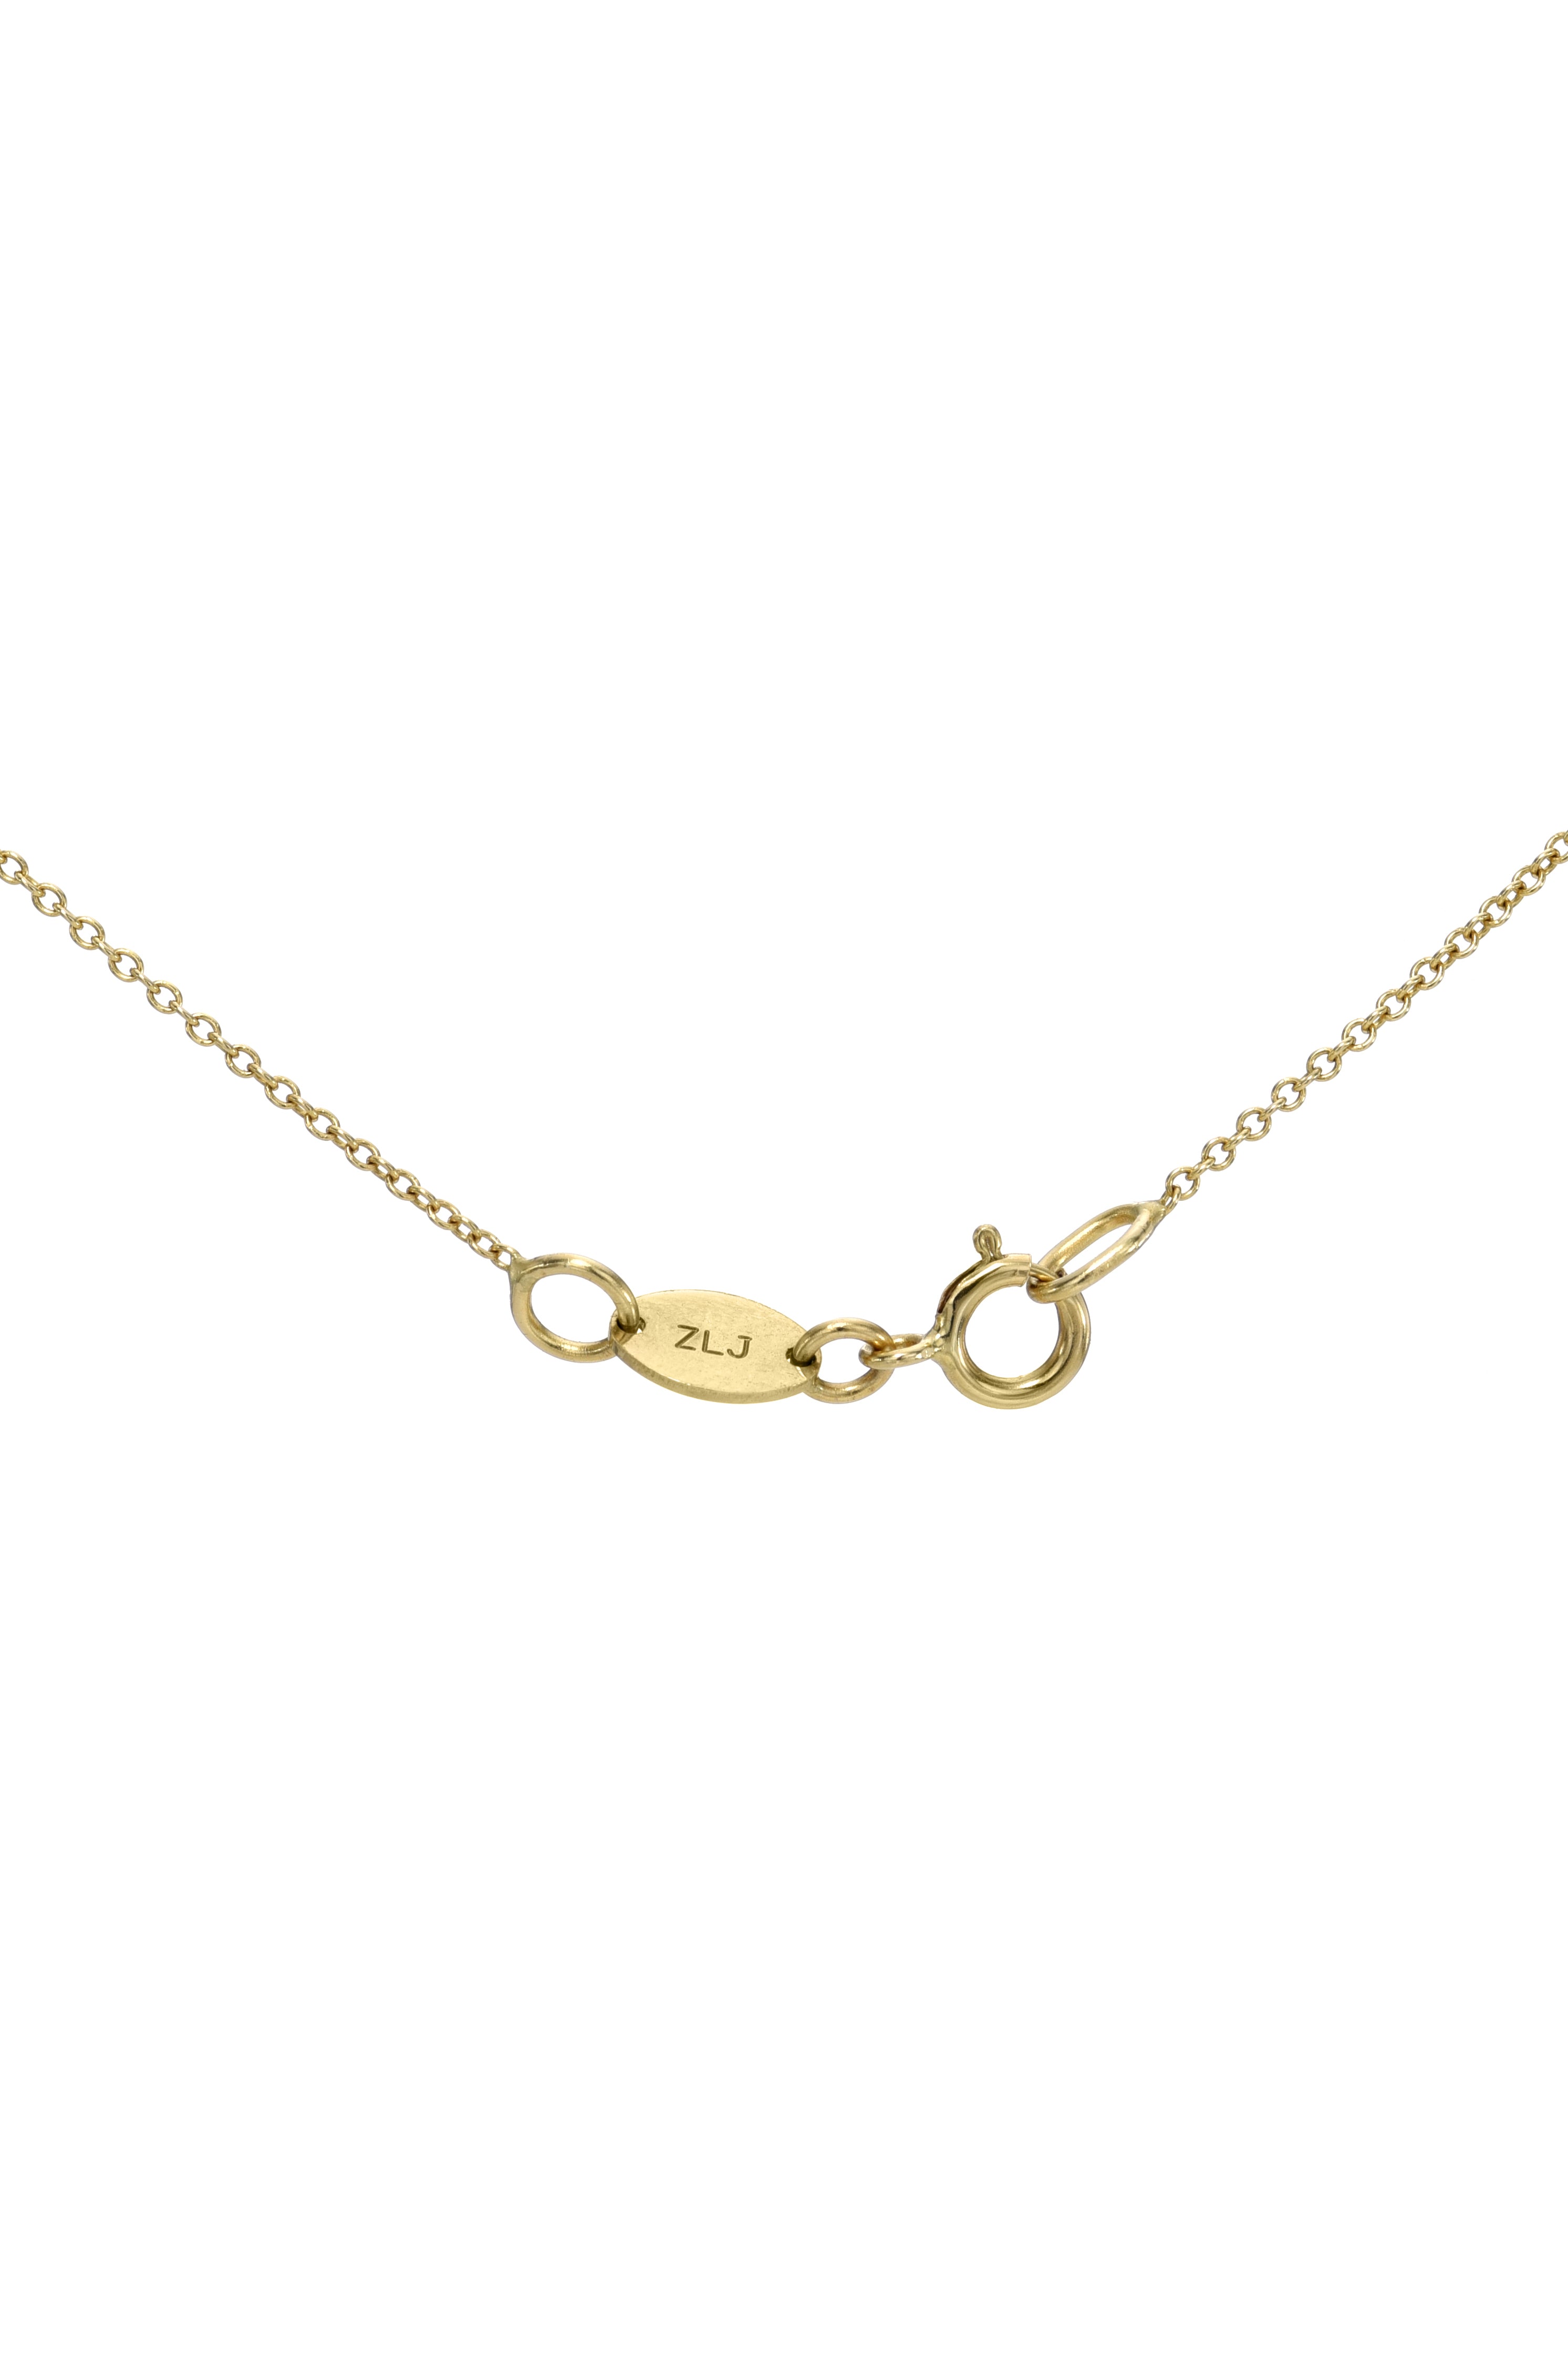 14K Gold Asymmetrical Multiple initials Necklace 18 + / 4 / Yes +